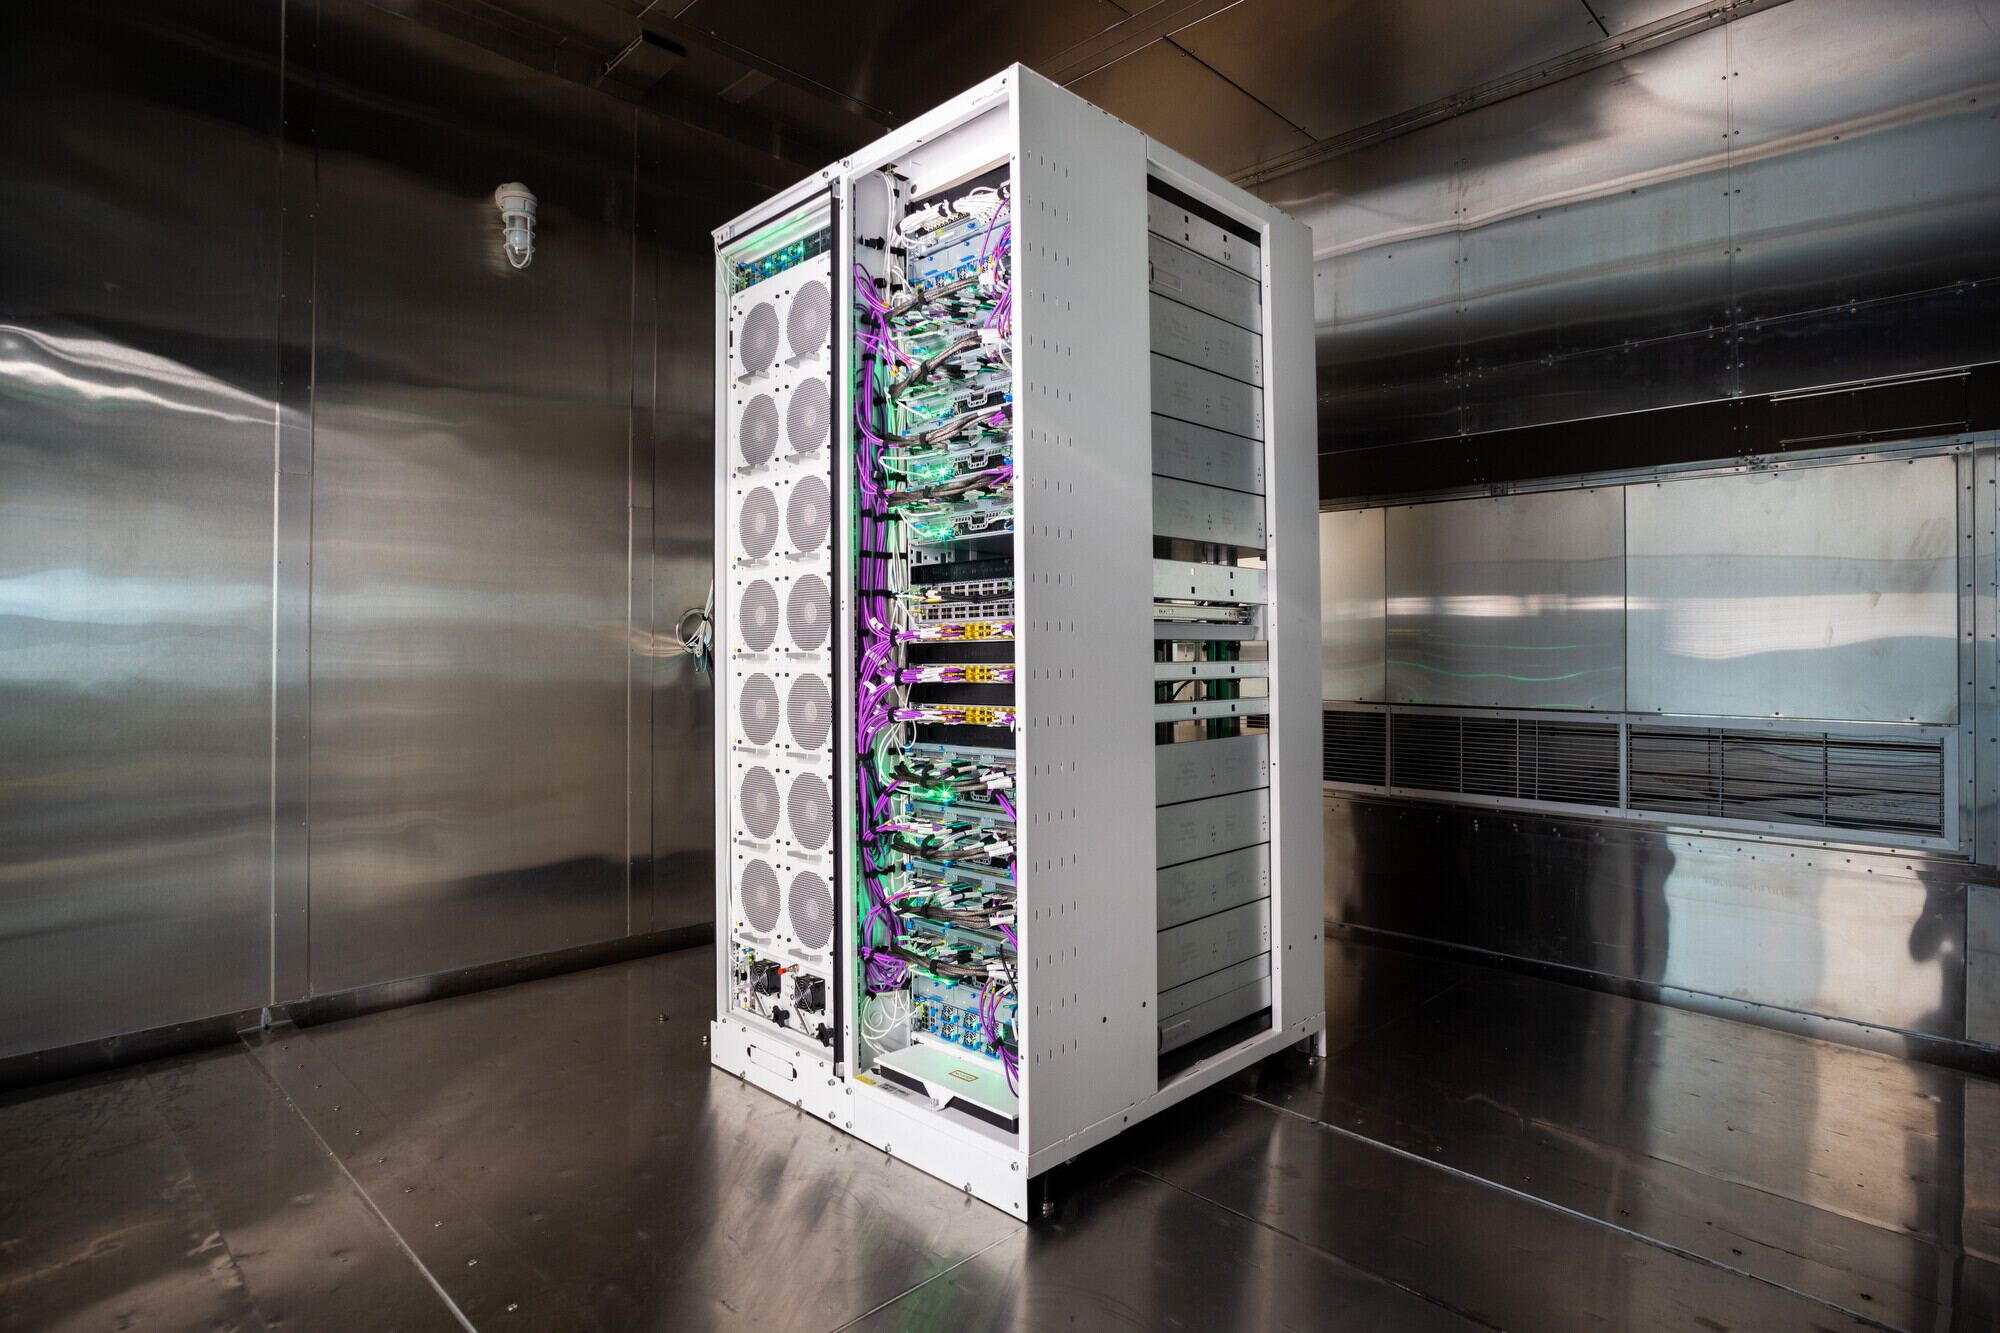 A new tall rectangular rack design from Microsoft shown here uses liquid cooling to keep its new Maia chips happy.